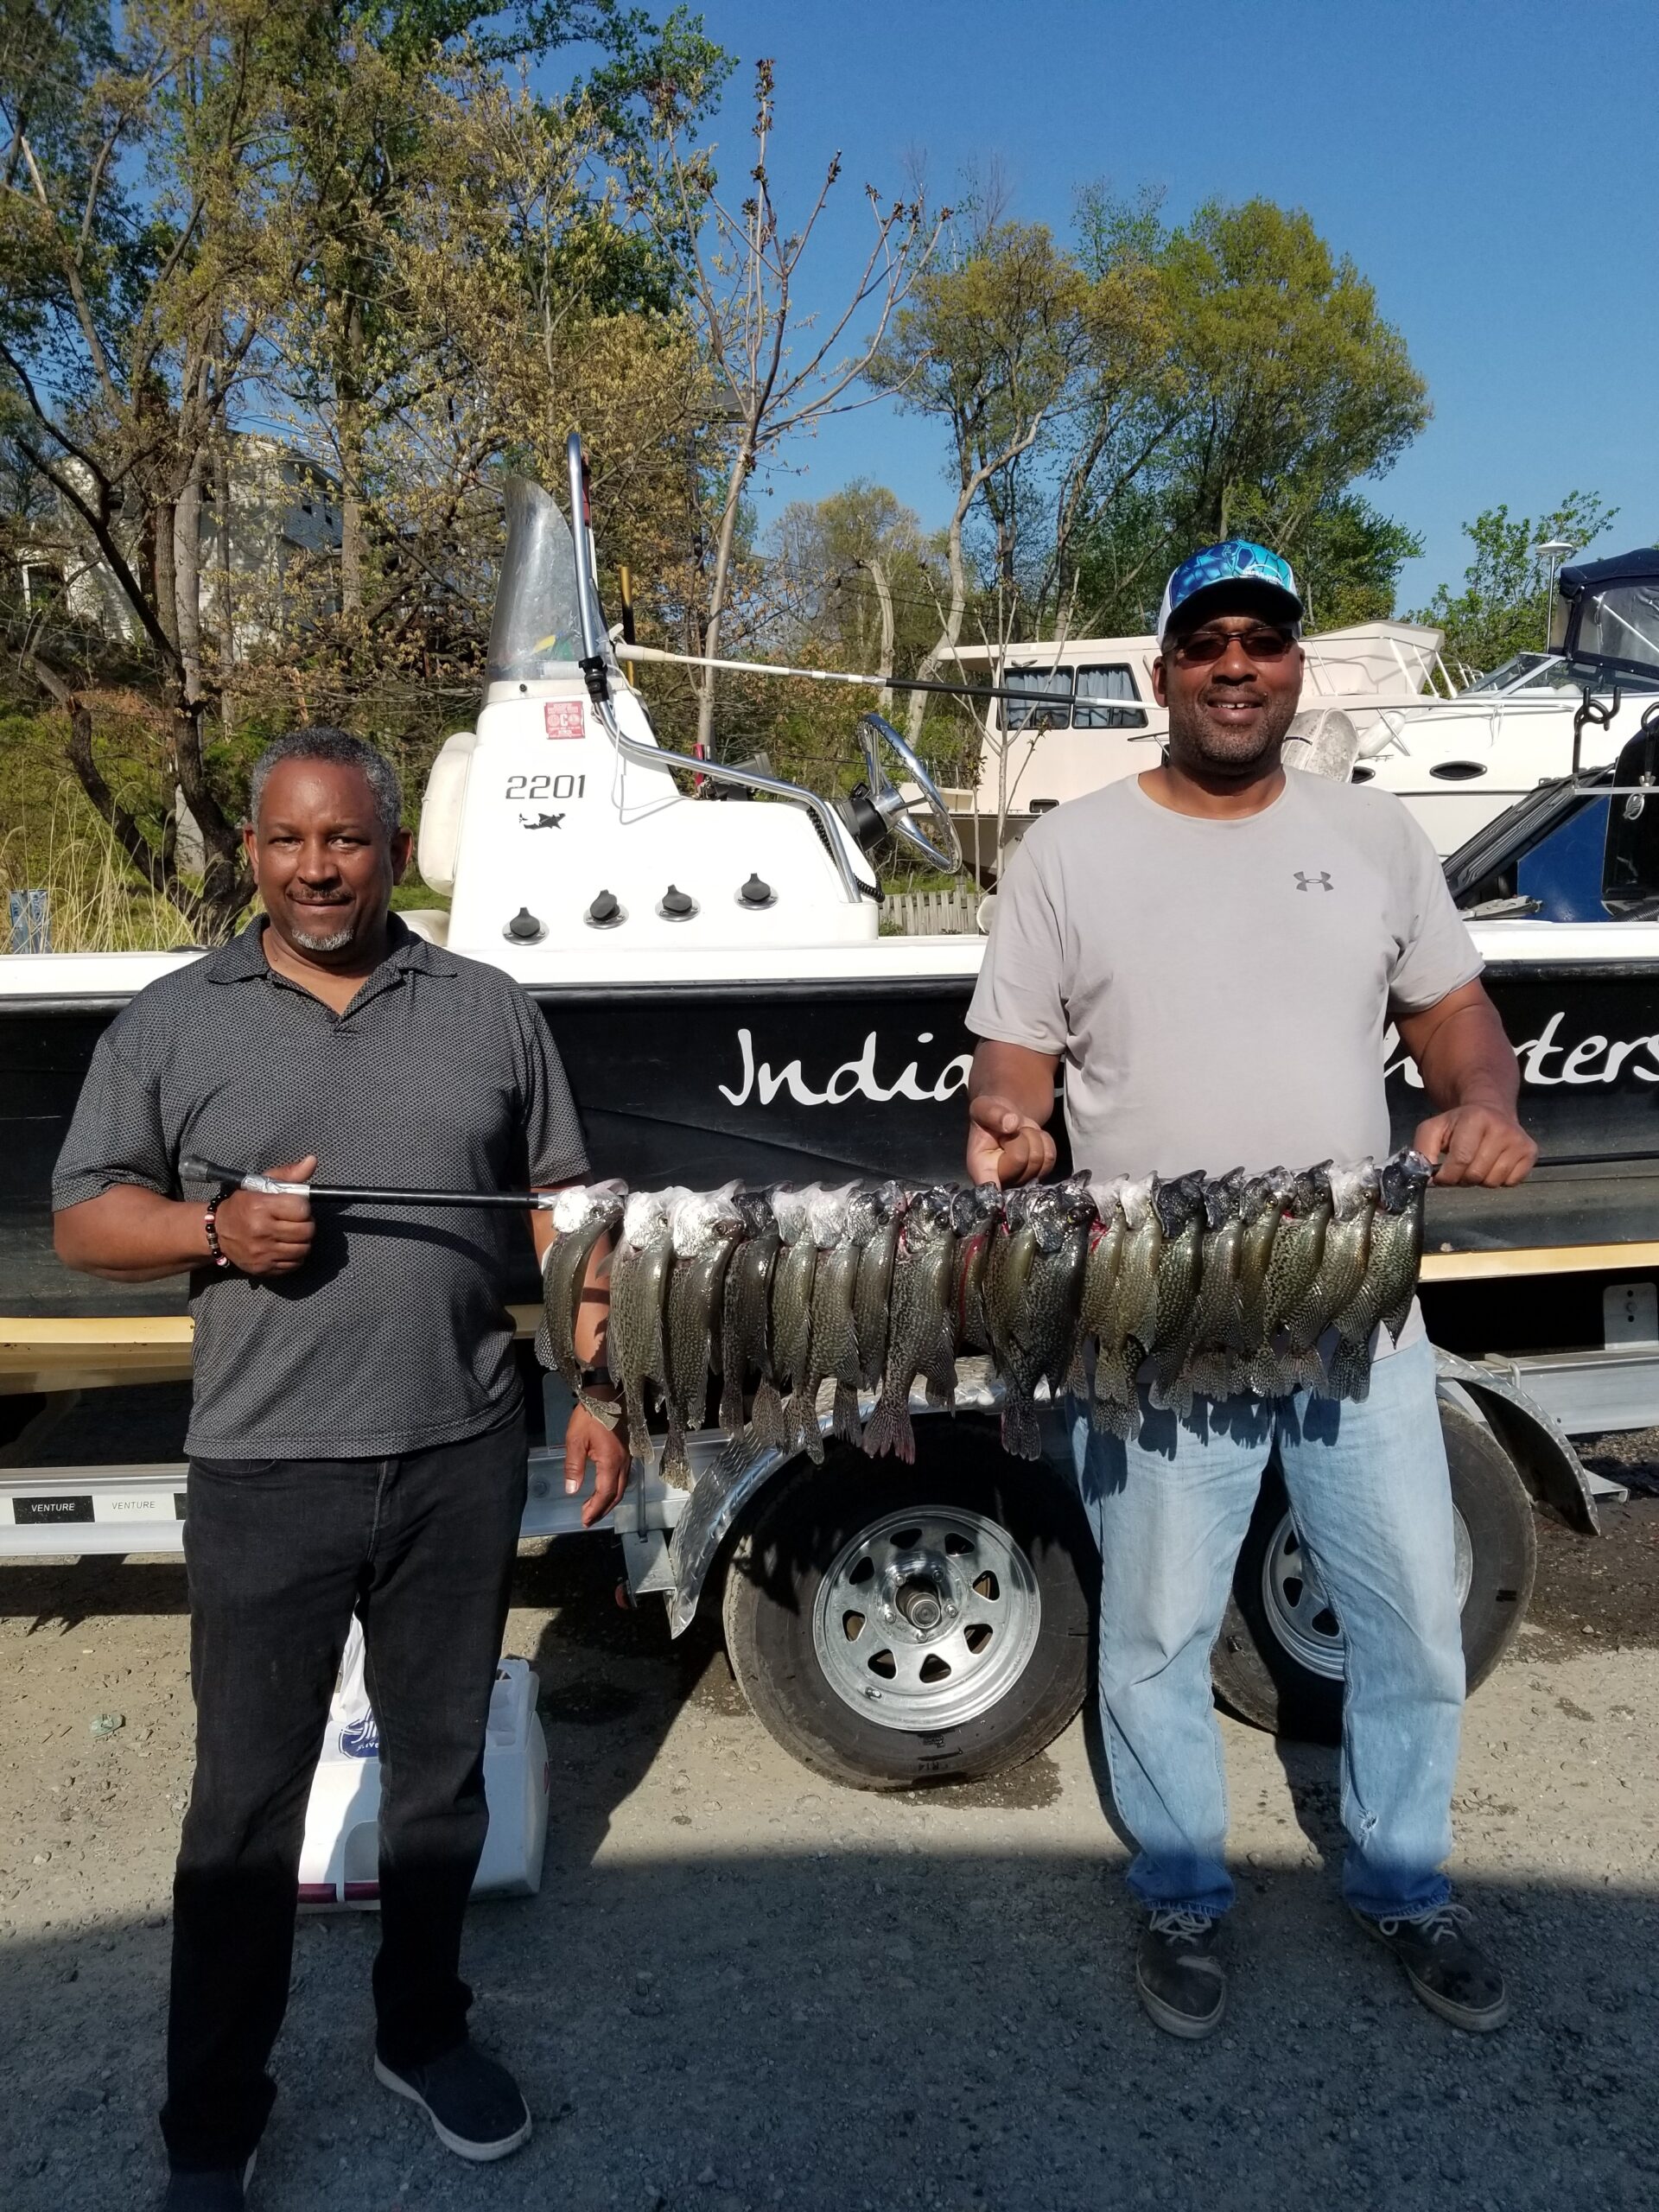 https://indianheadcharters.com/wp-content/uploads/2022/05/42322-scaled.jpg